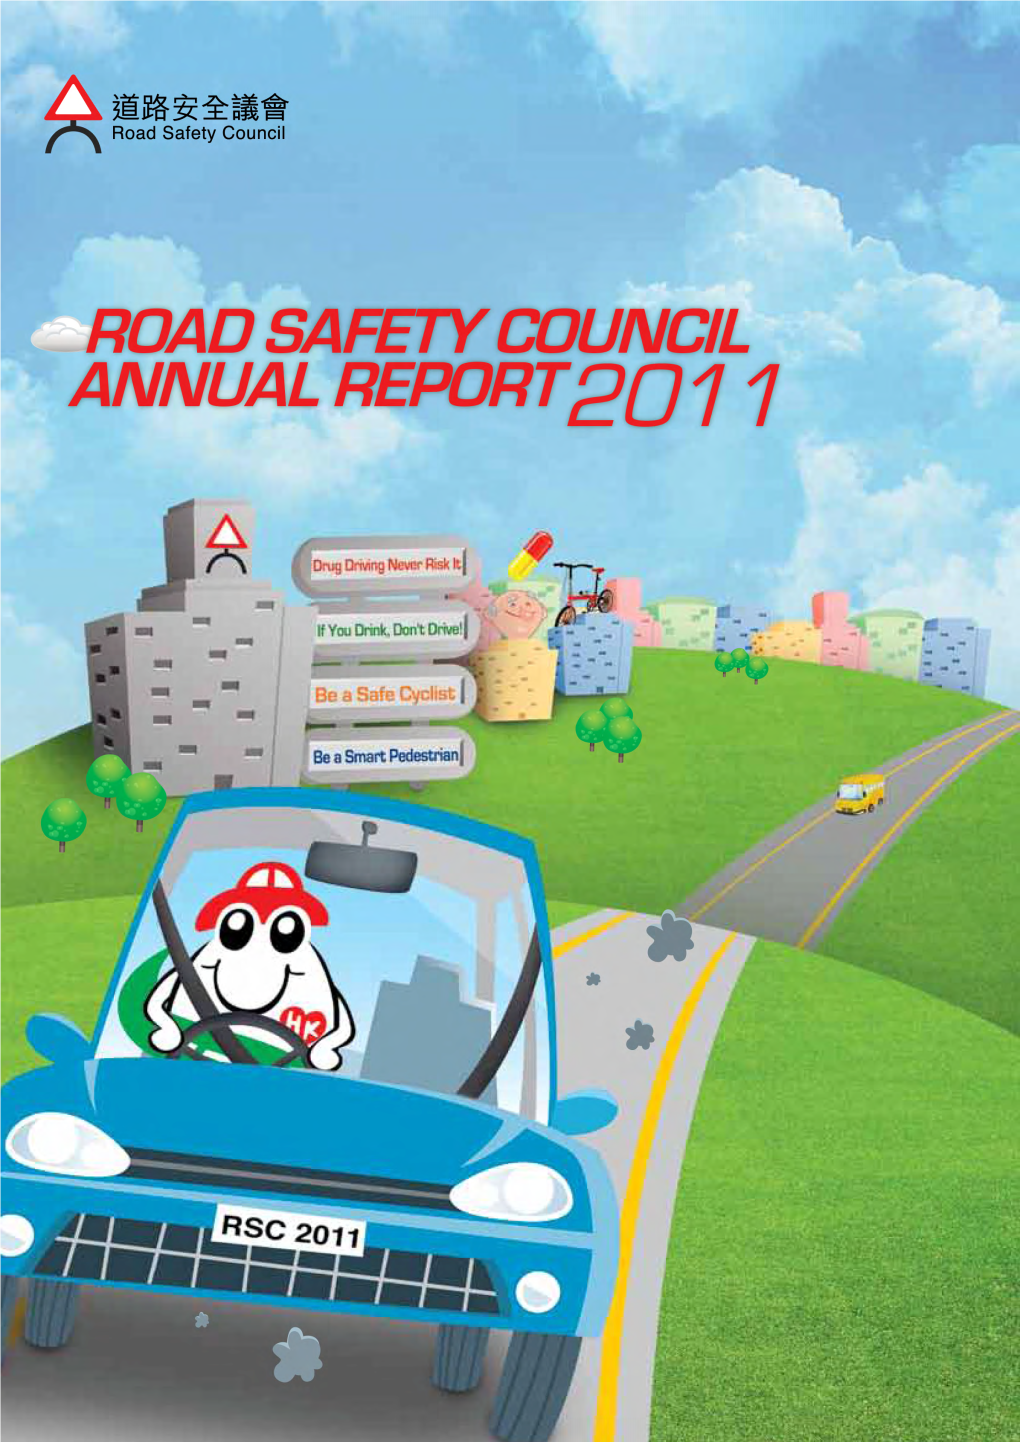 Road Safety Council Annual Report 2011 Was Contributed By